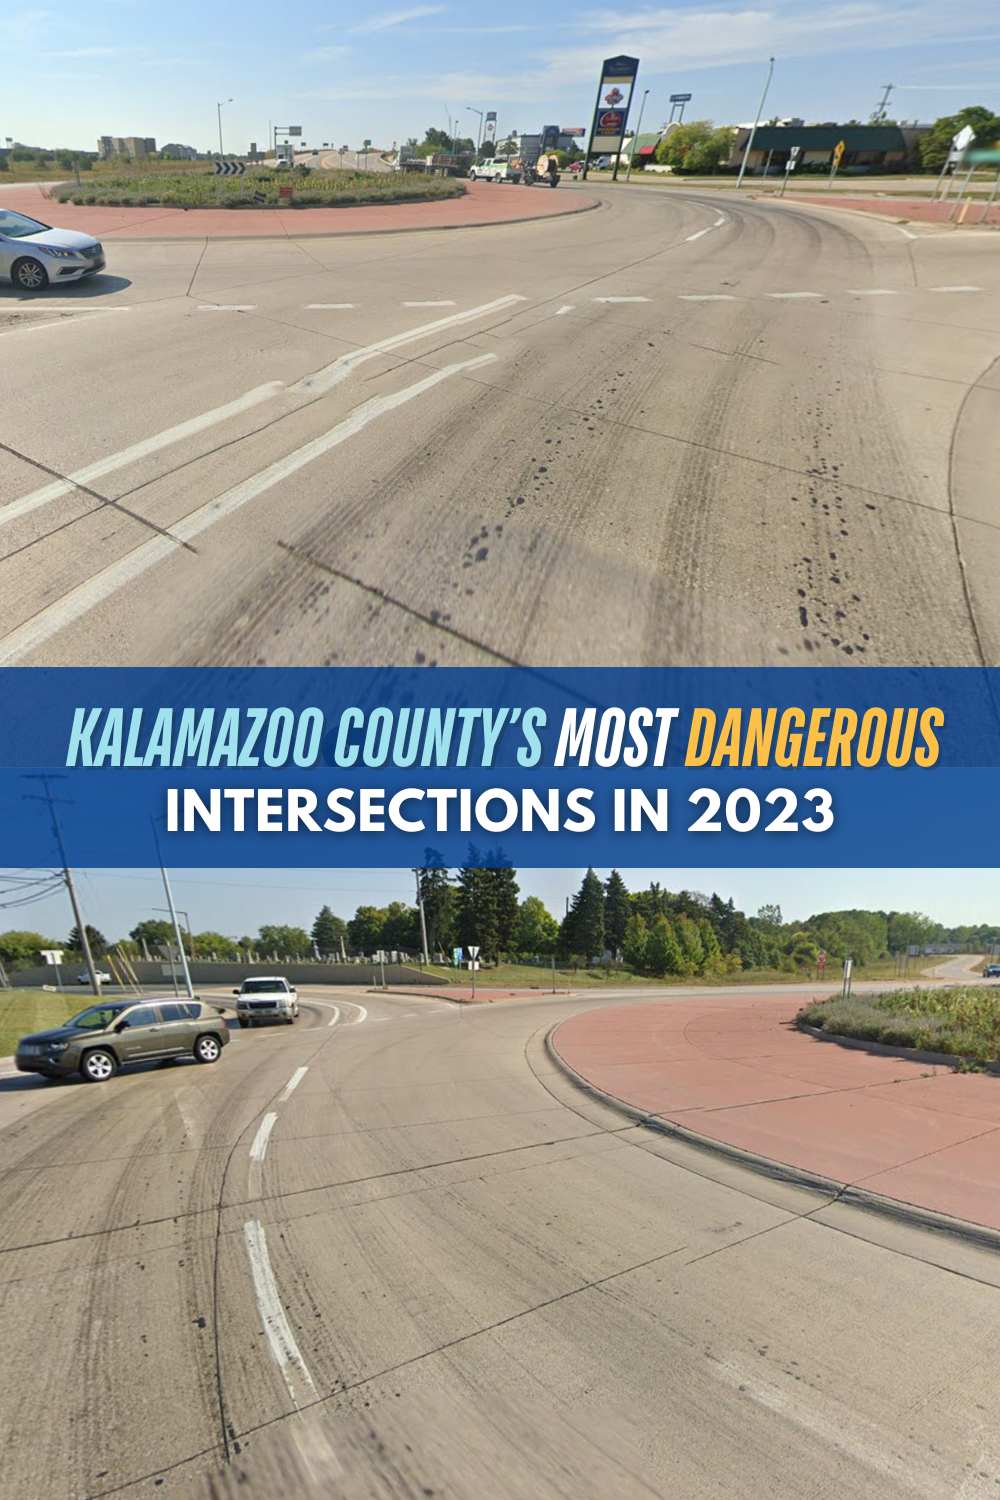 Kalamazoo County’s Most Dangerous Intersections in 2023